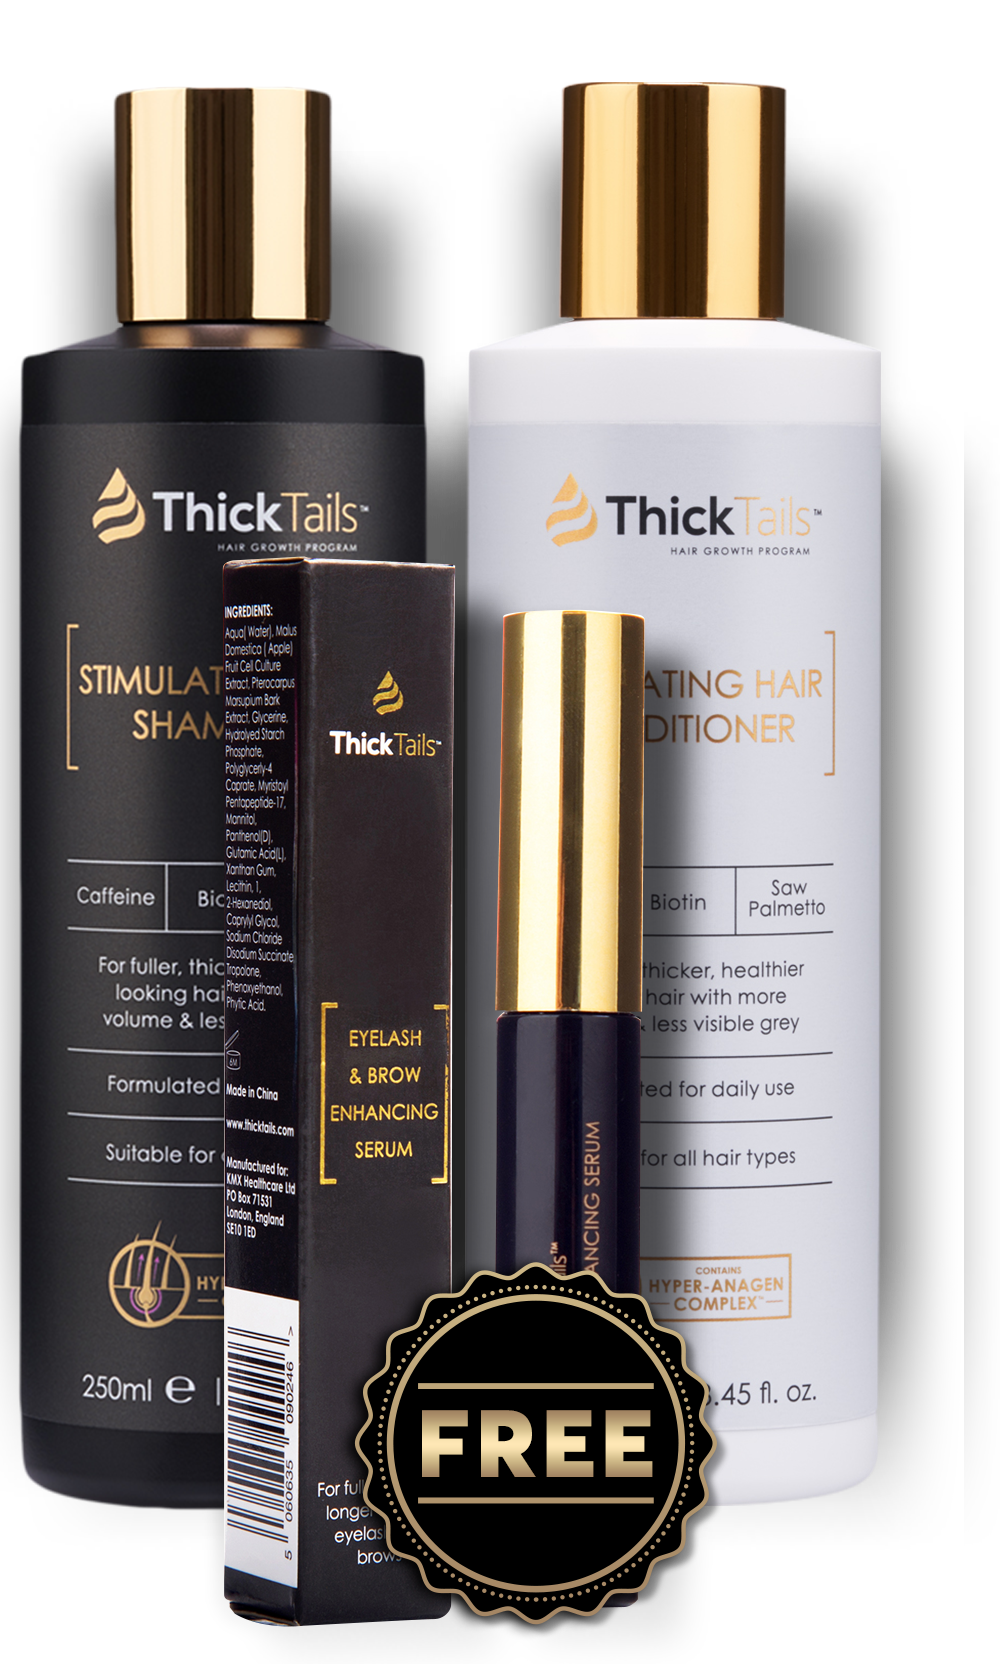 thicktails products